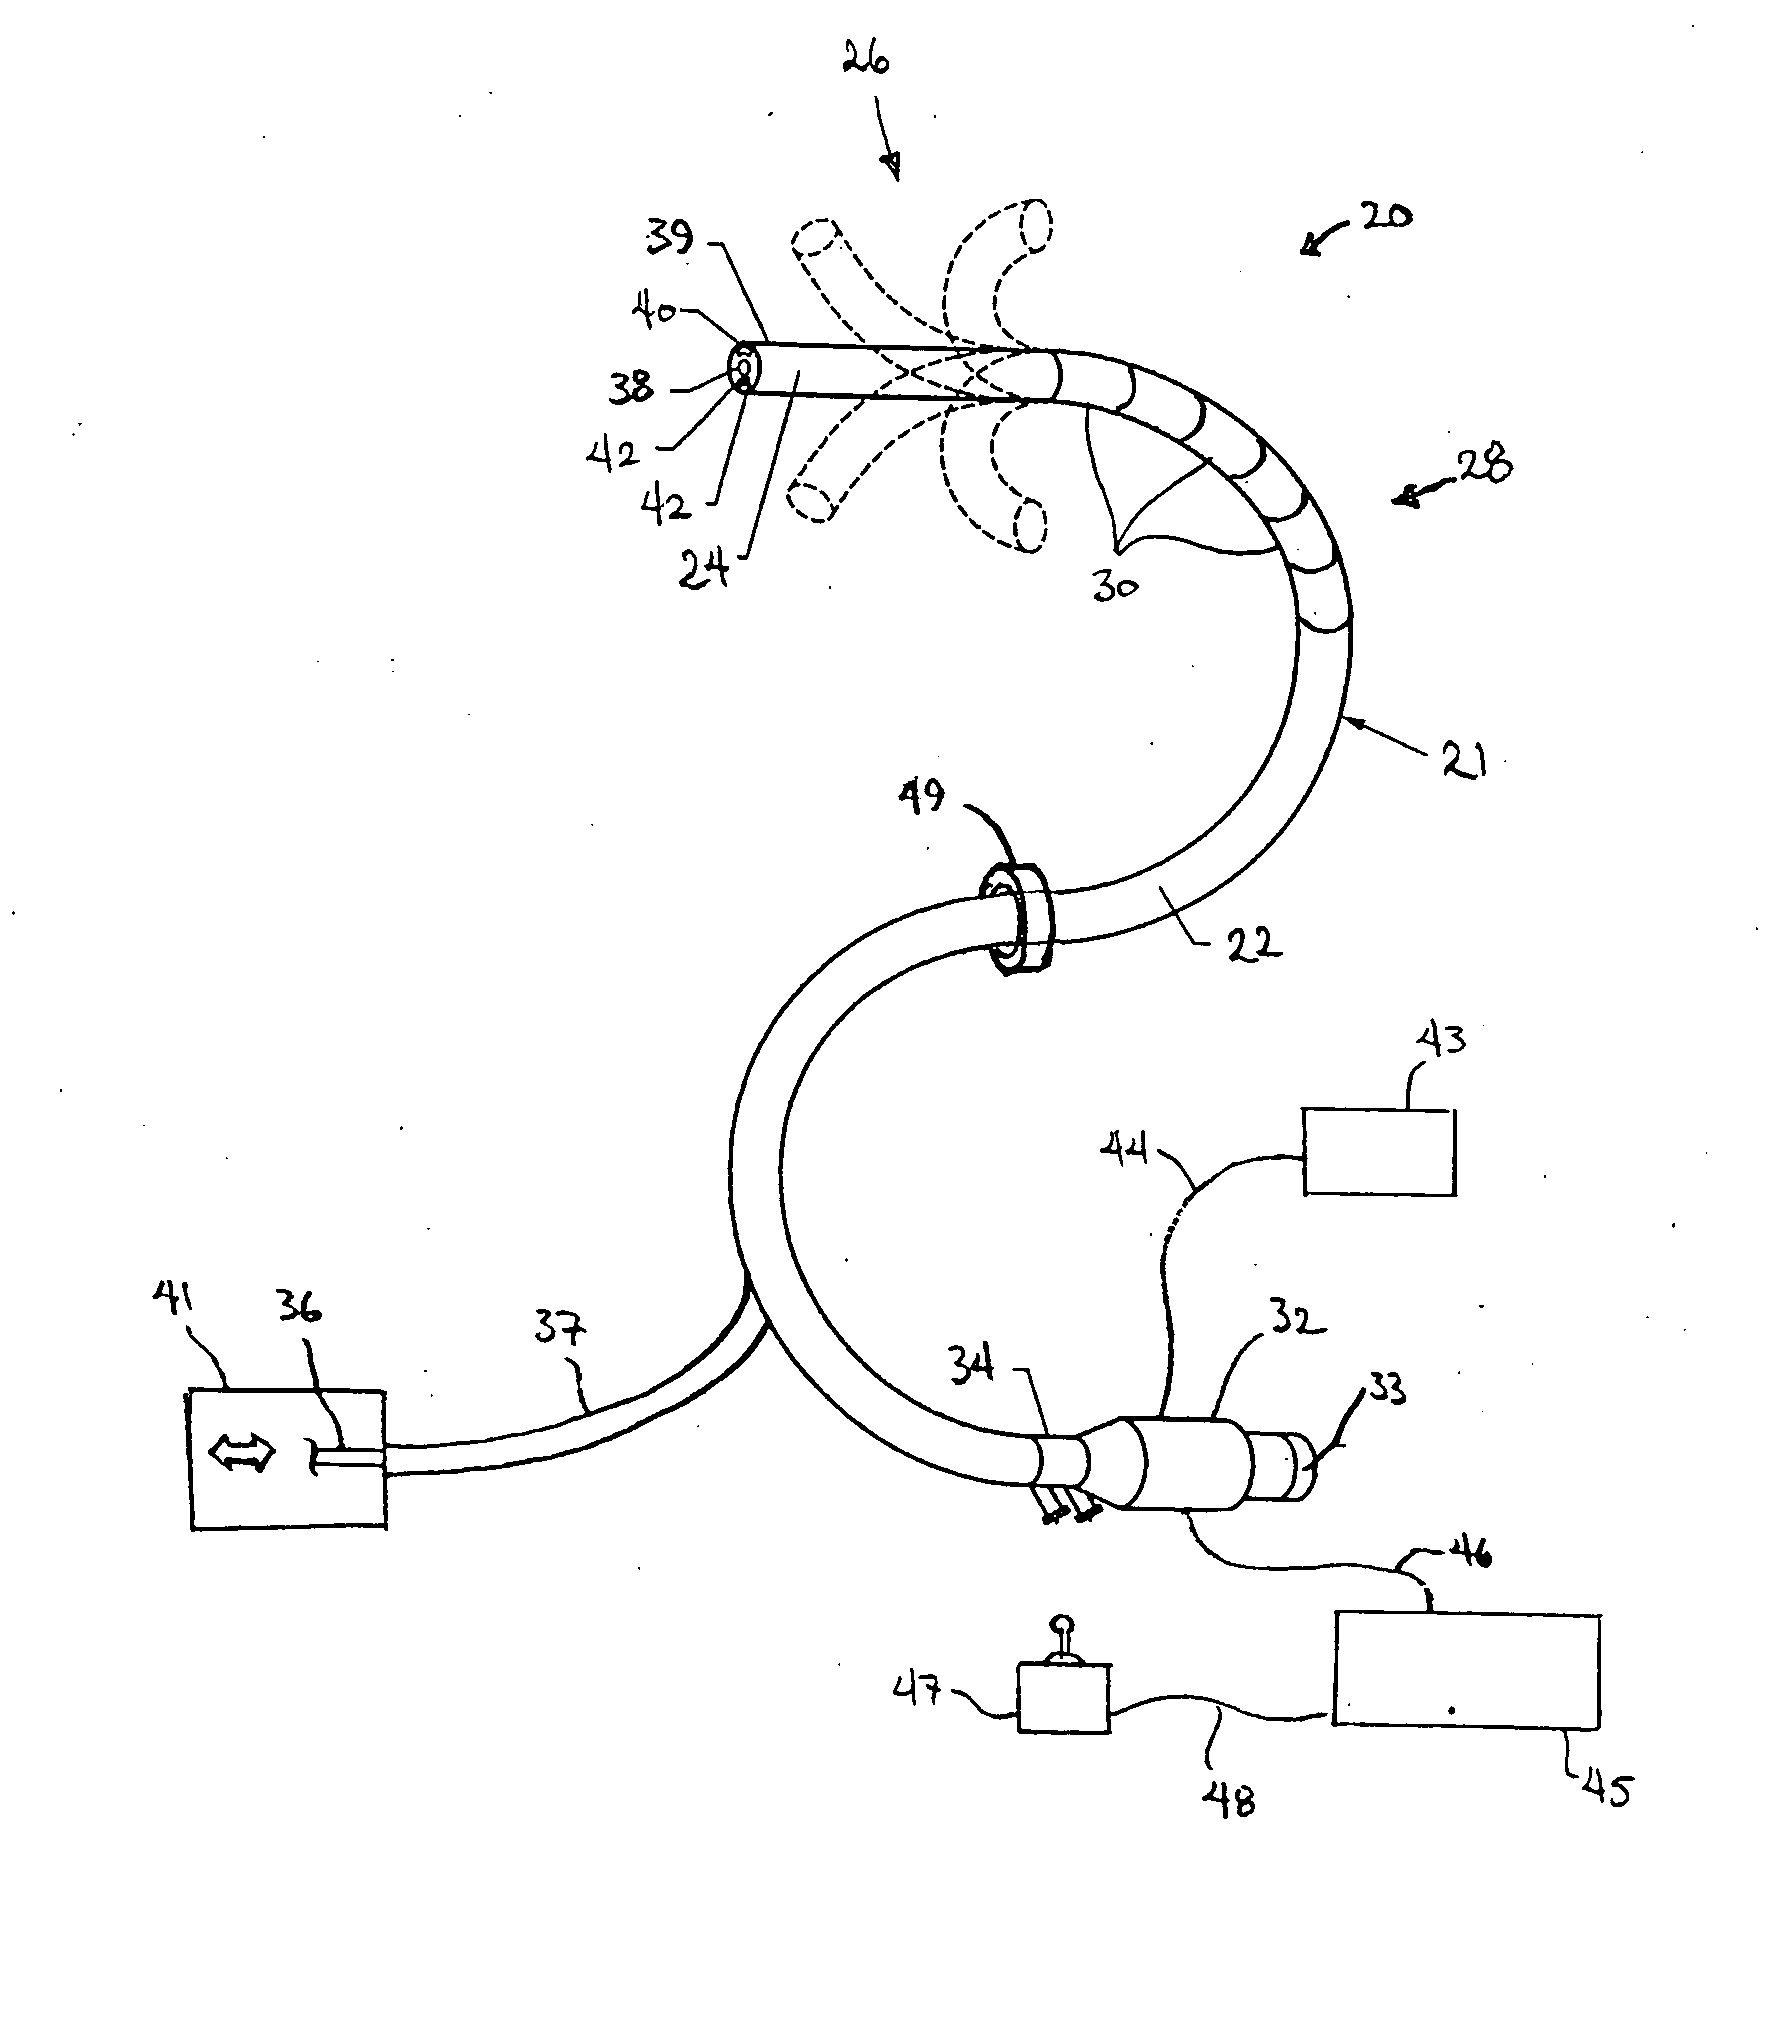 Method and apparatus for advancing an instrument along an arbitrary path